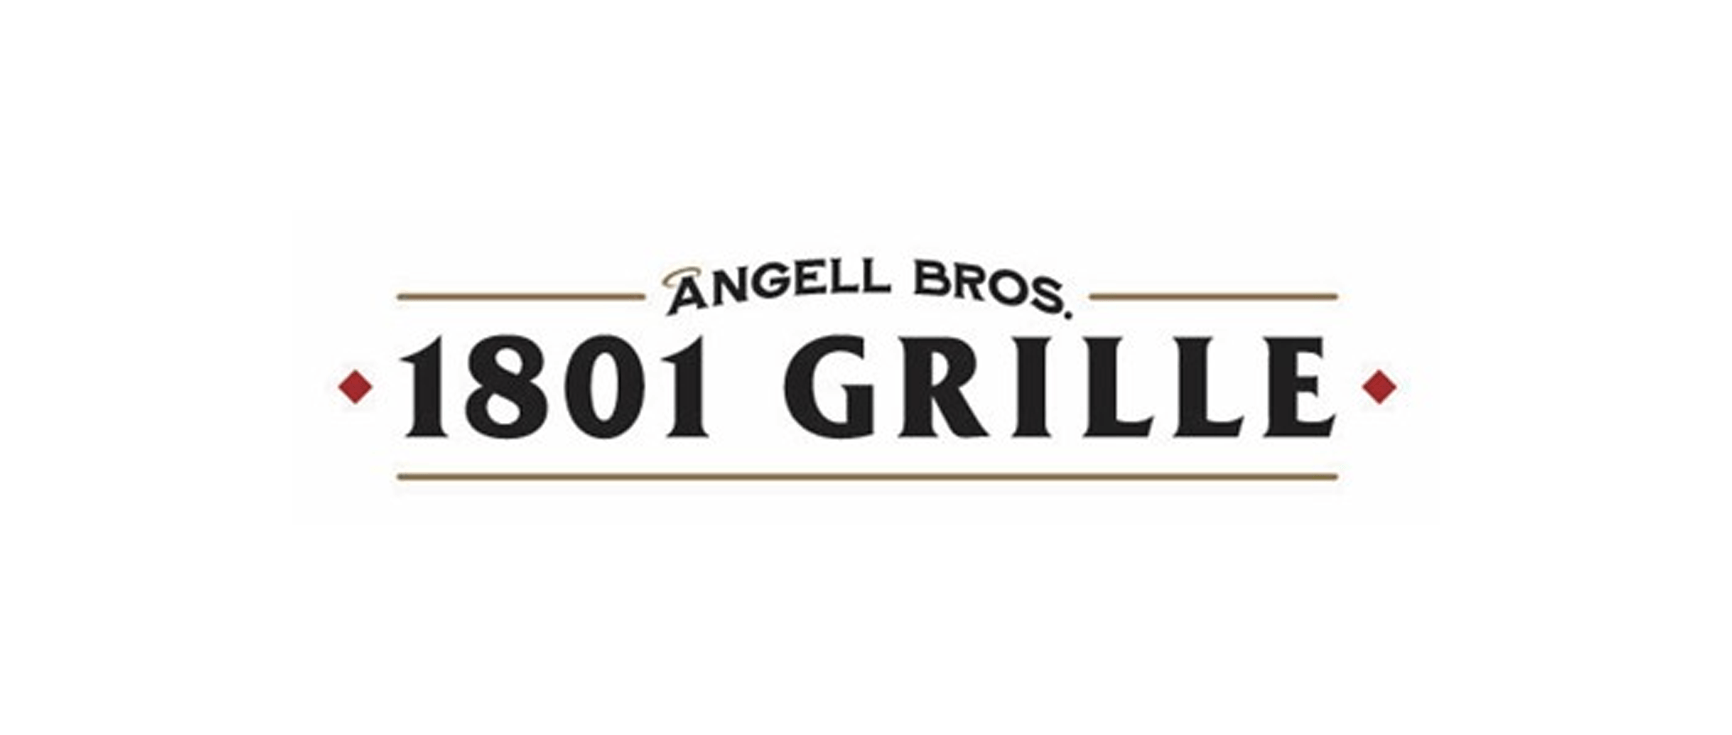 angell bros 1801 grille